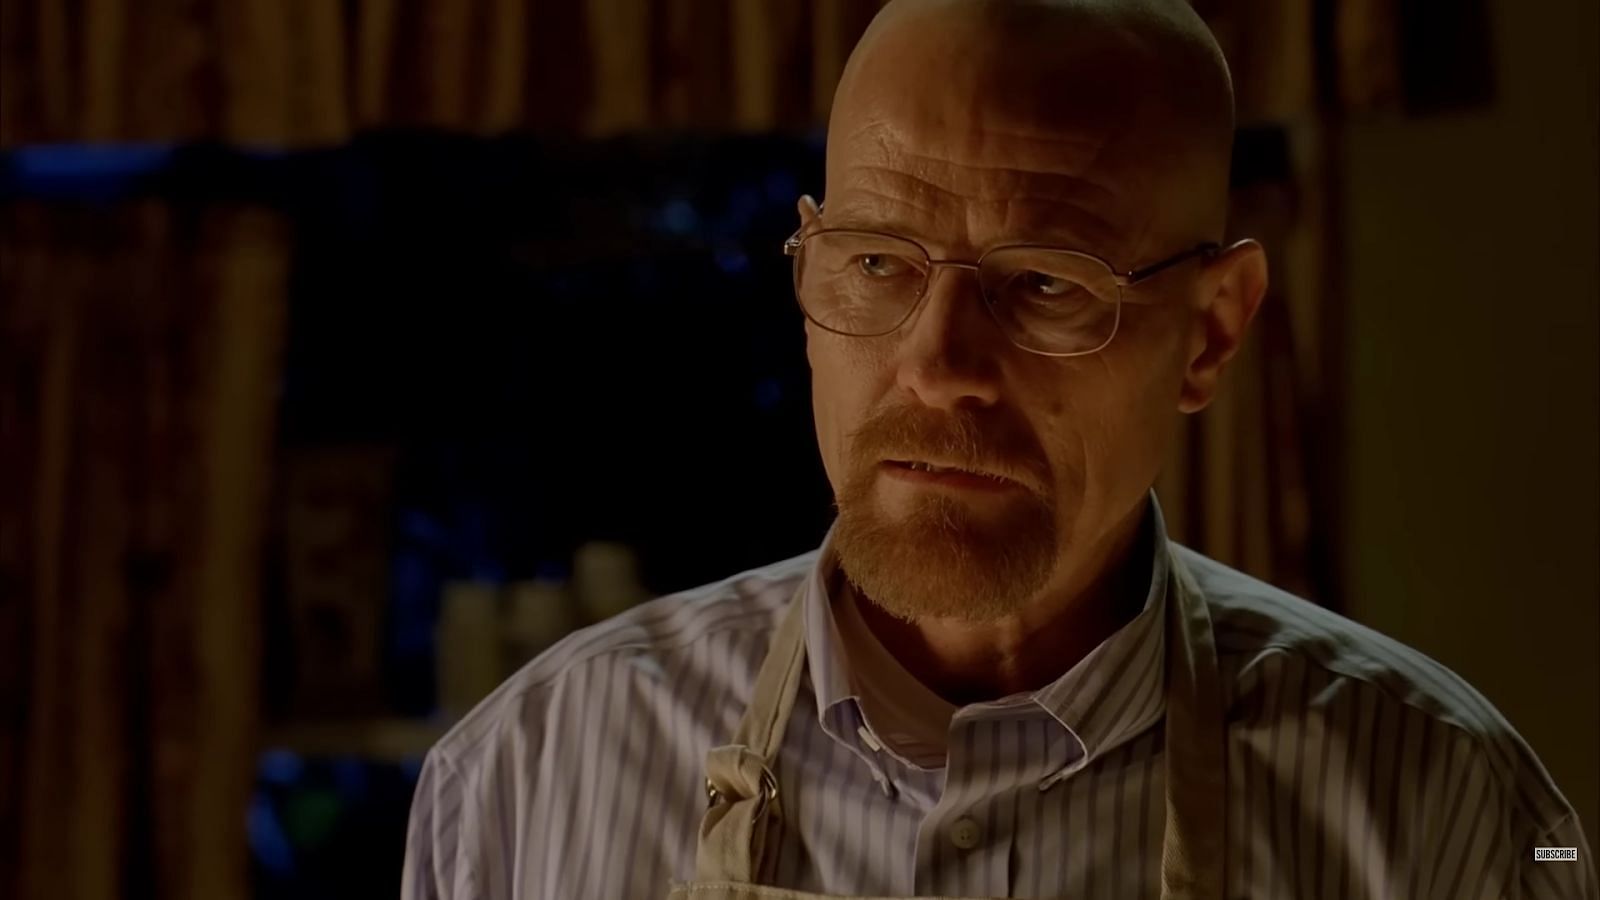 When did Breaking Bad come out?